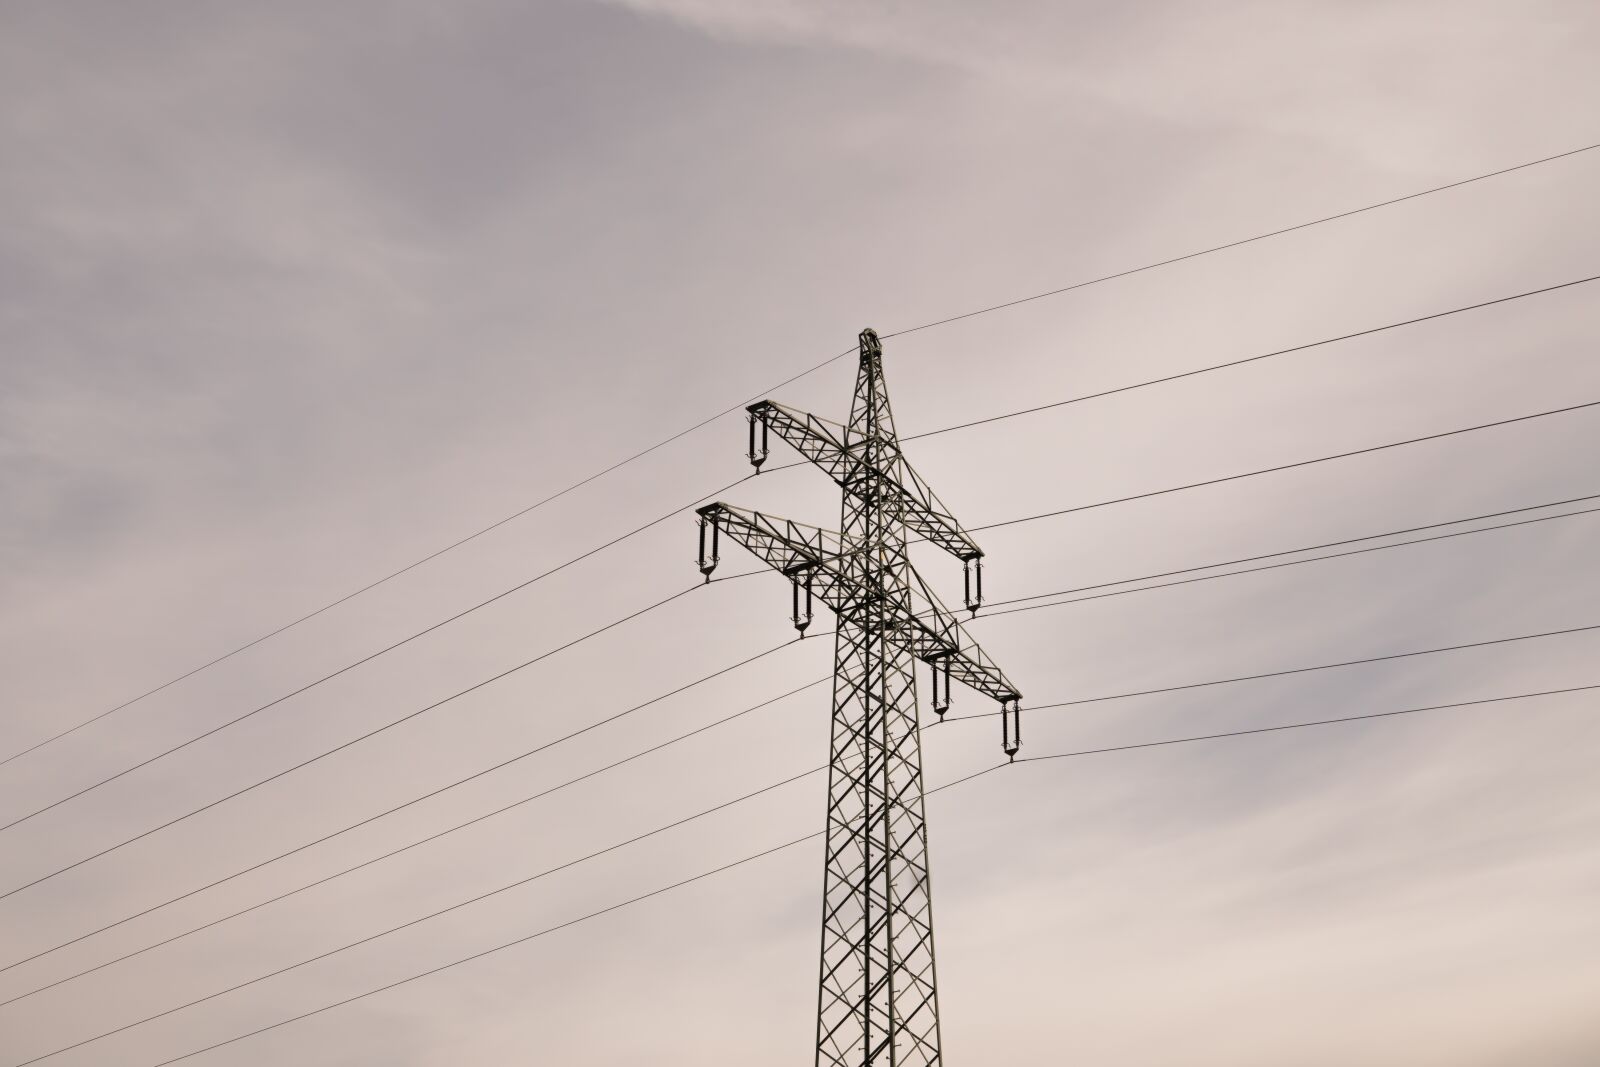 Sony a6300 sample photo. Strommast, power line, current photography